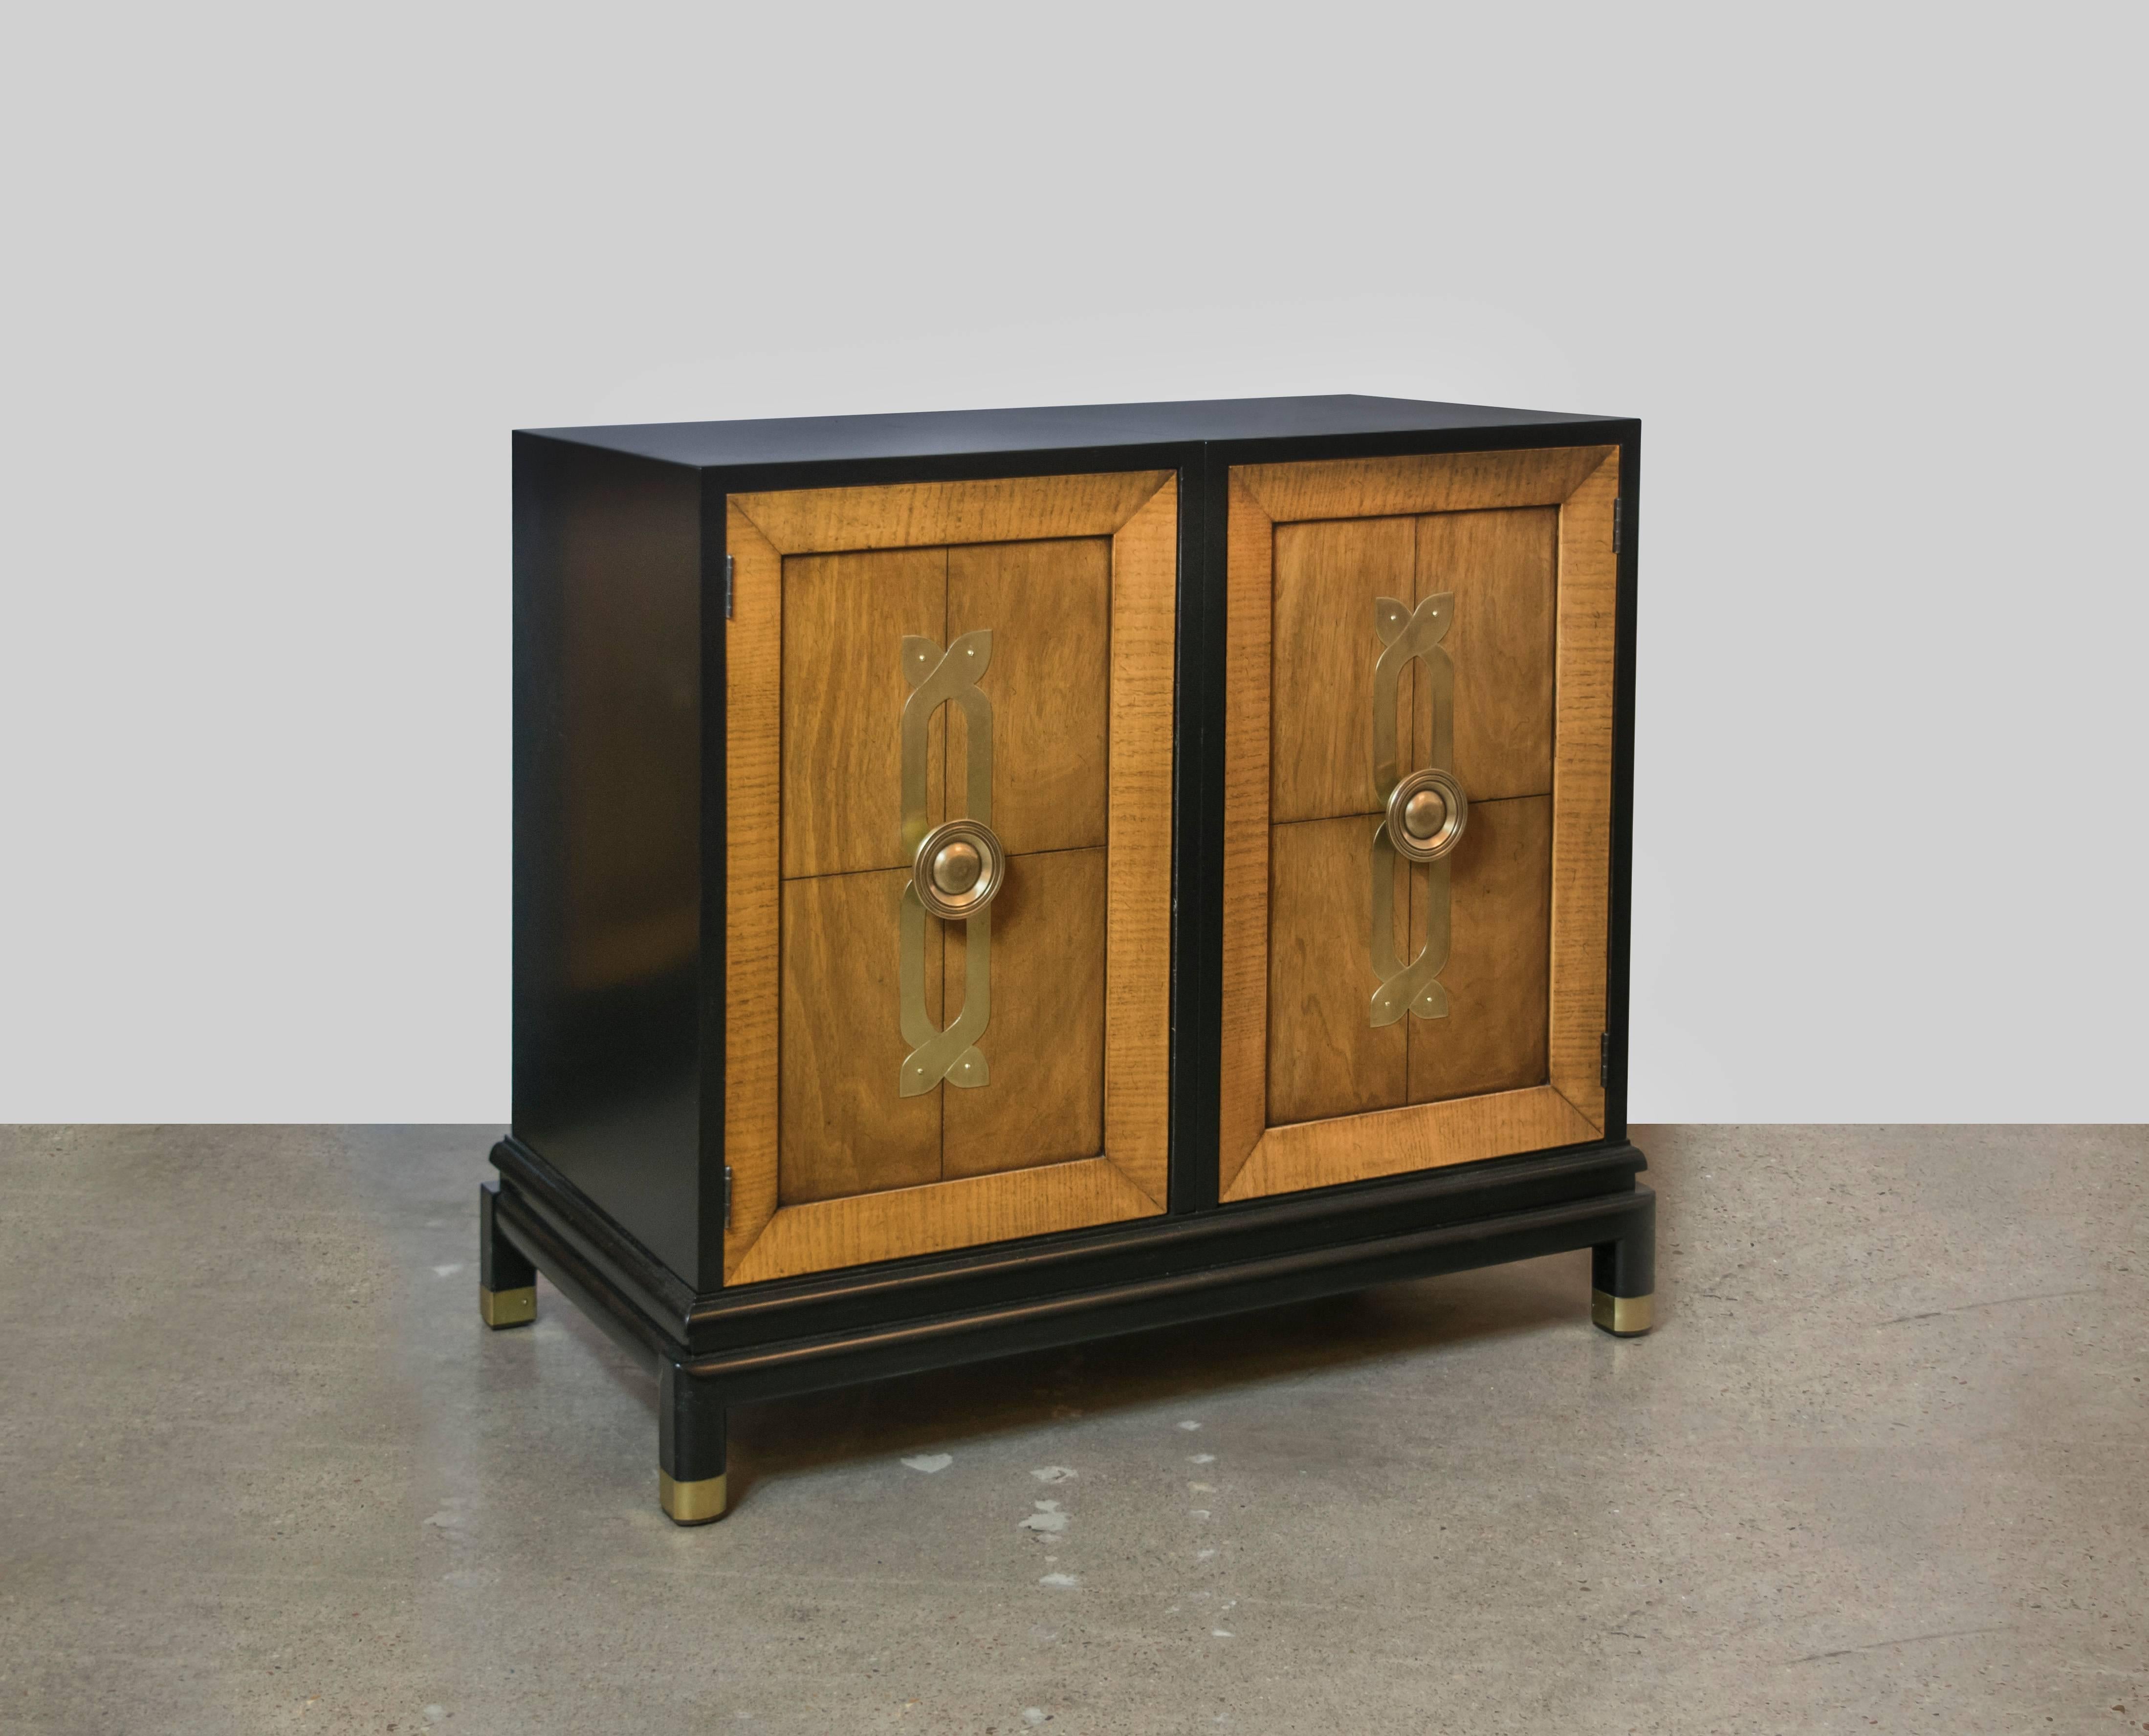 American Pair of Renzo Rutili Commodes or Chests with Ebony and Brass Details